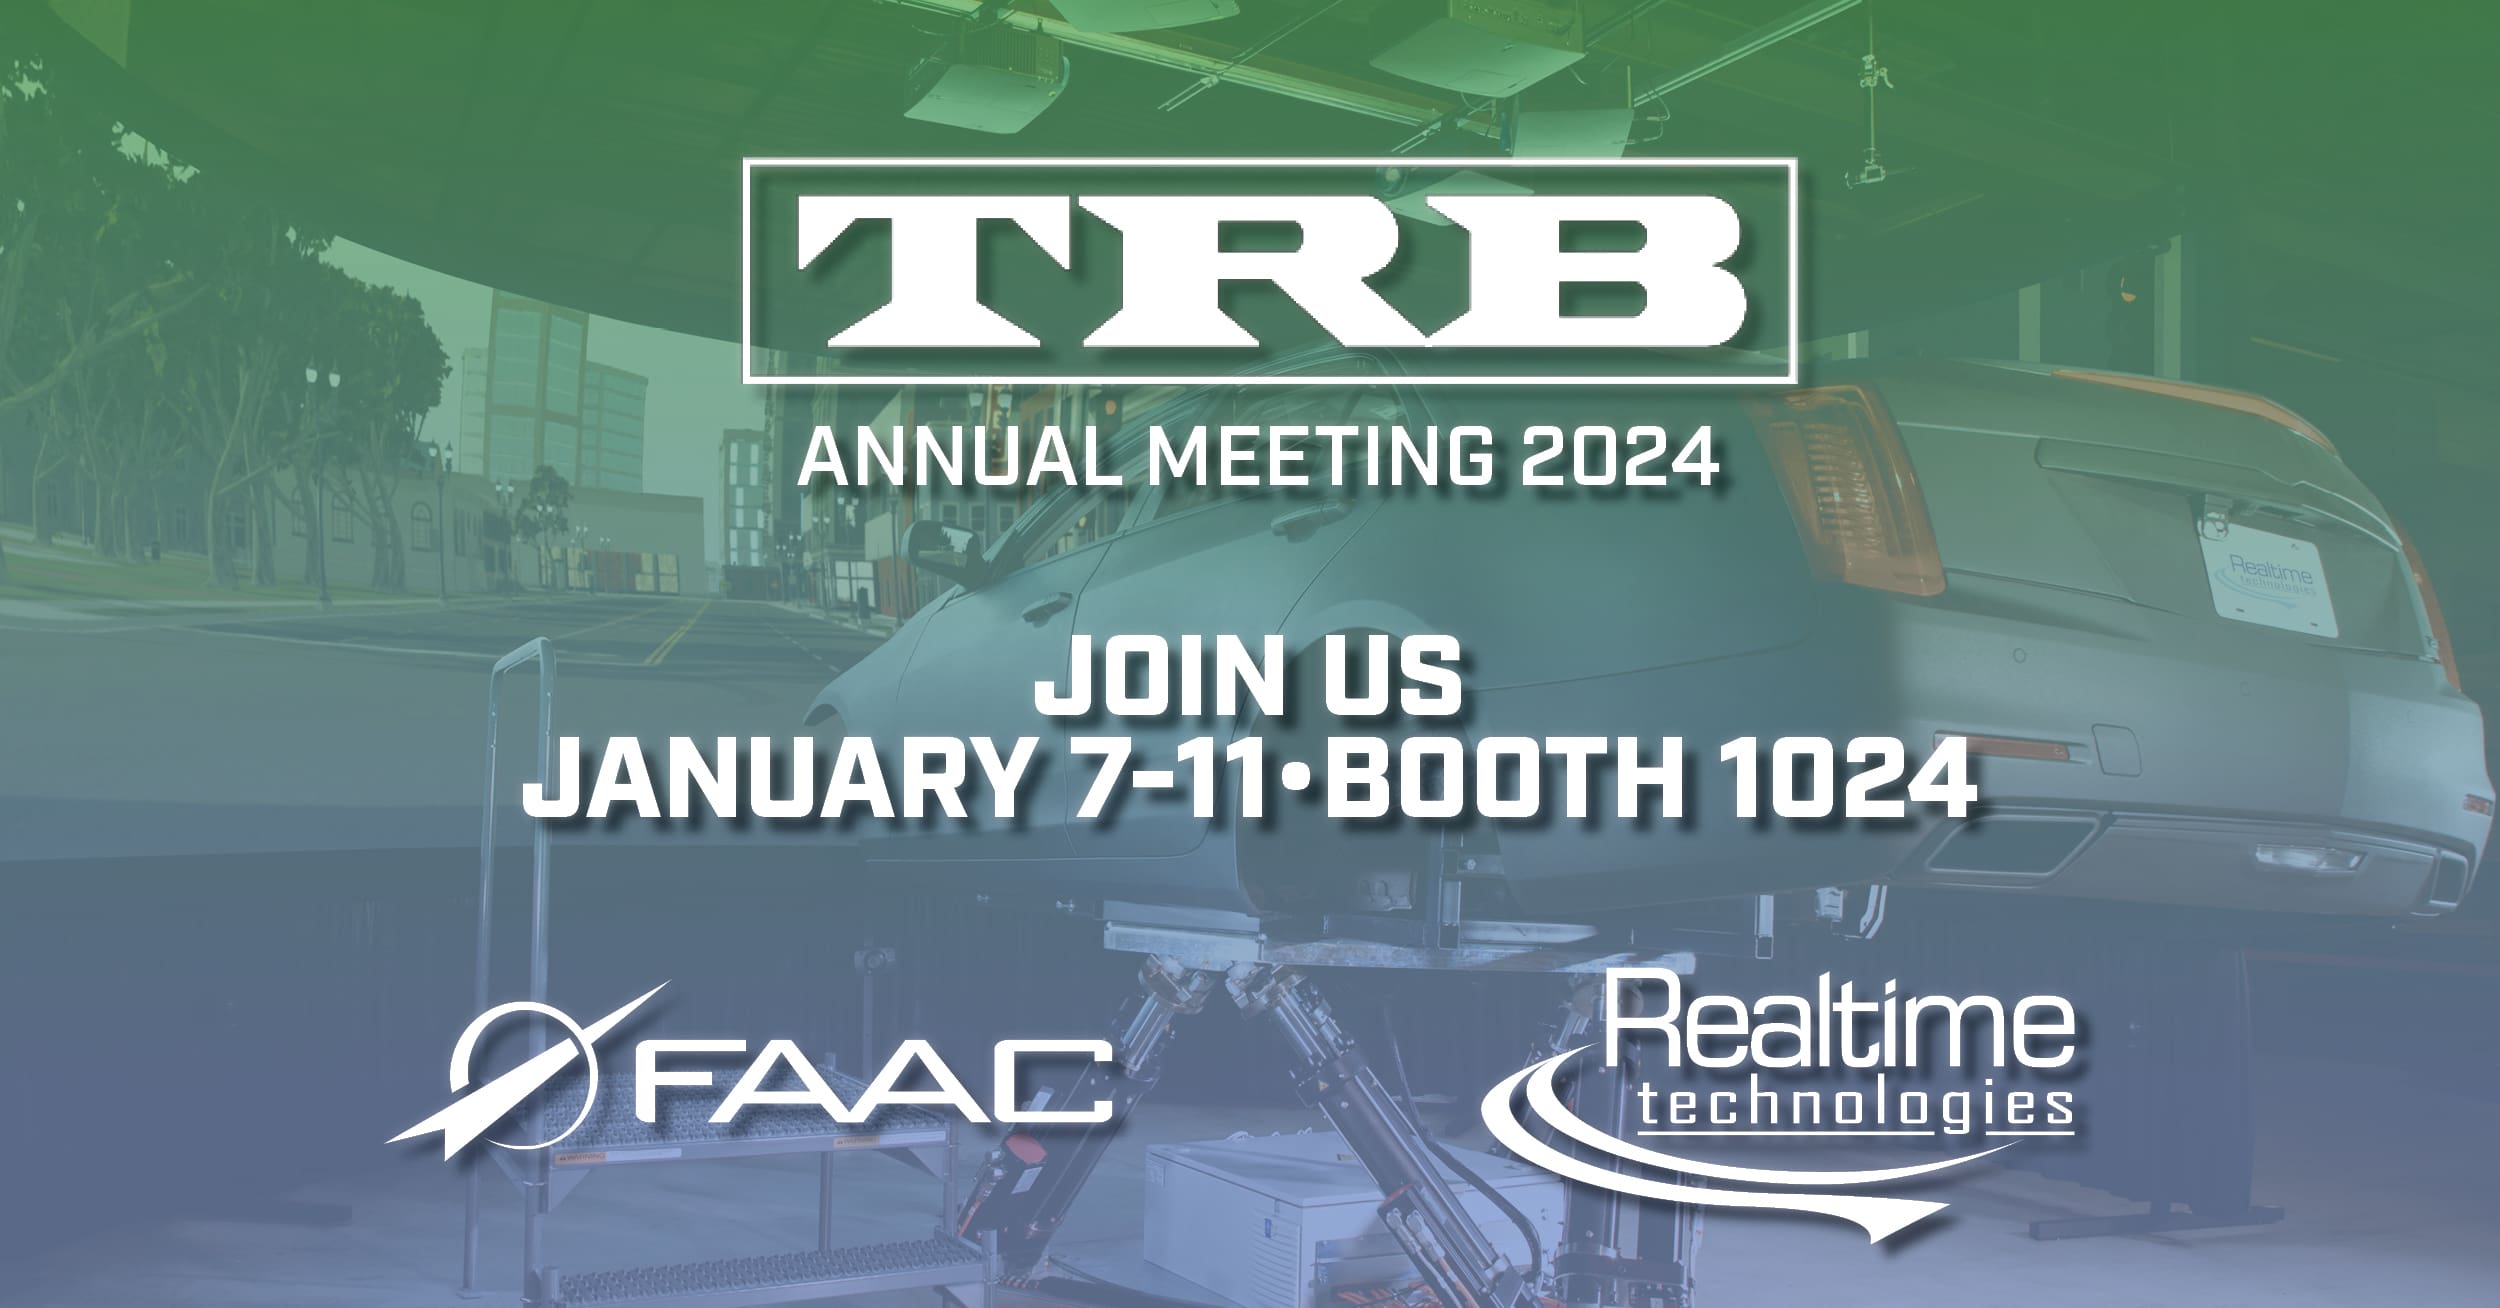 Meet Realtime Technologies at TRB Annual Meeting 2024